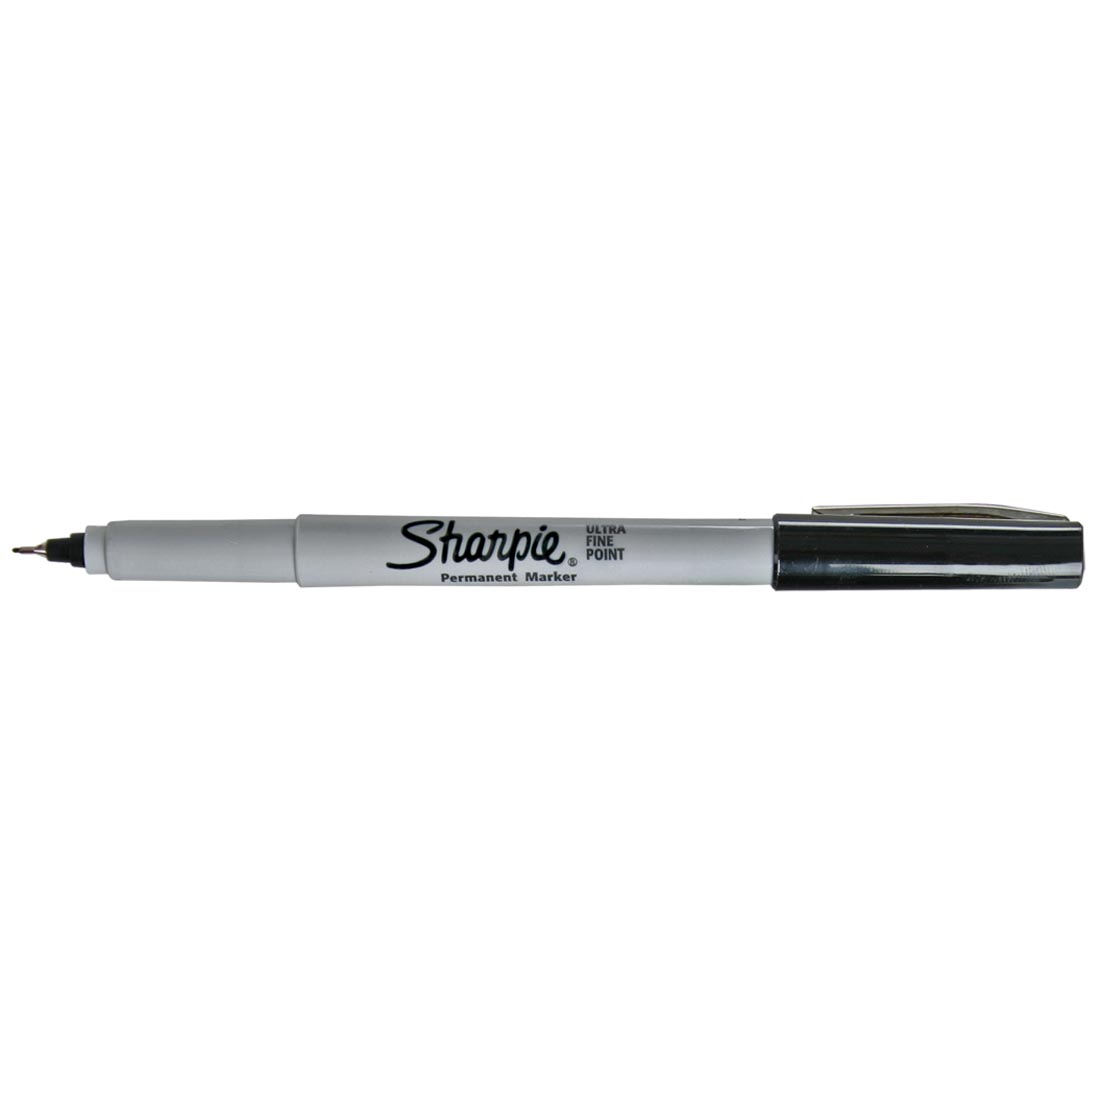 Black Sharpie Ultra Fine Point Permanent Marker with its cap on the opposite end